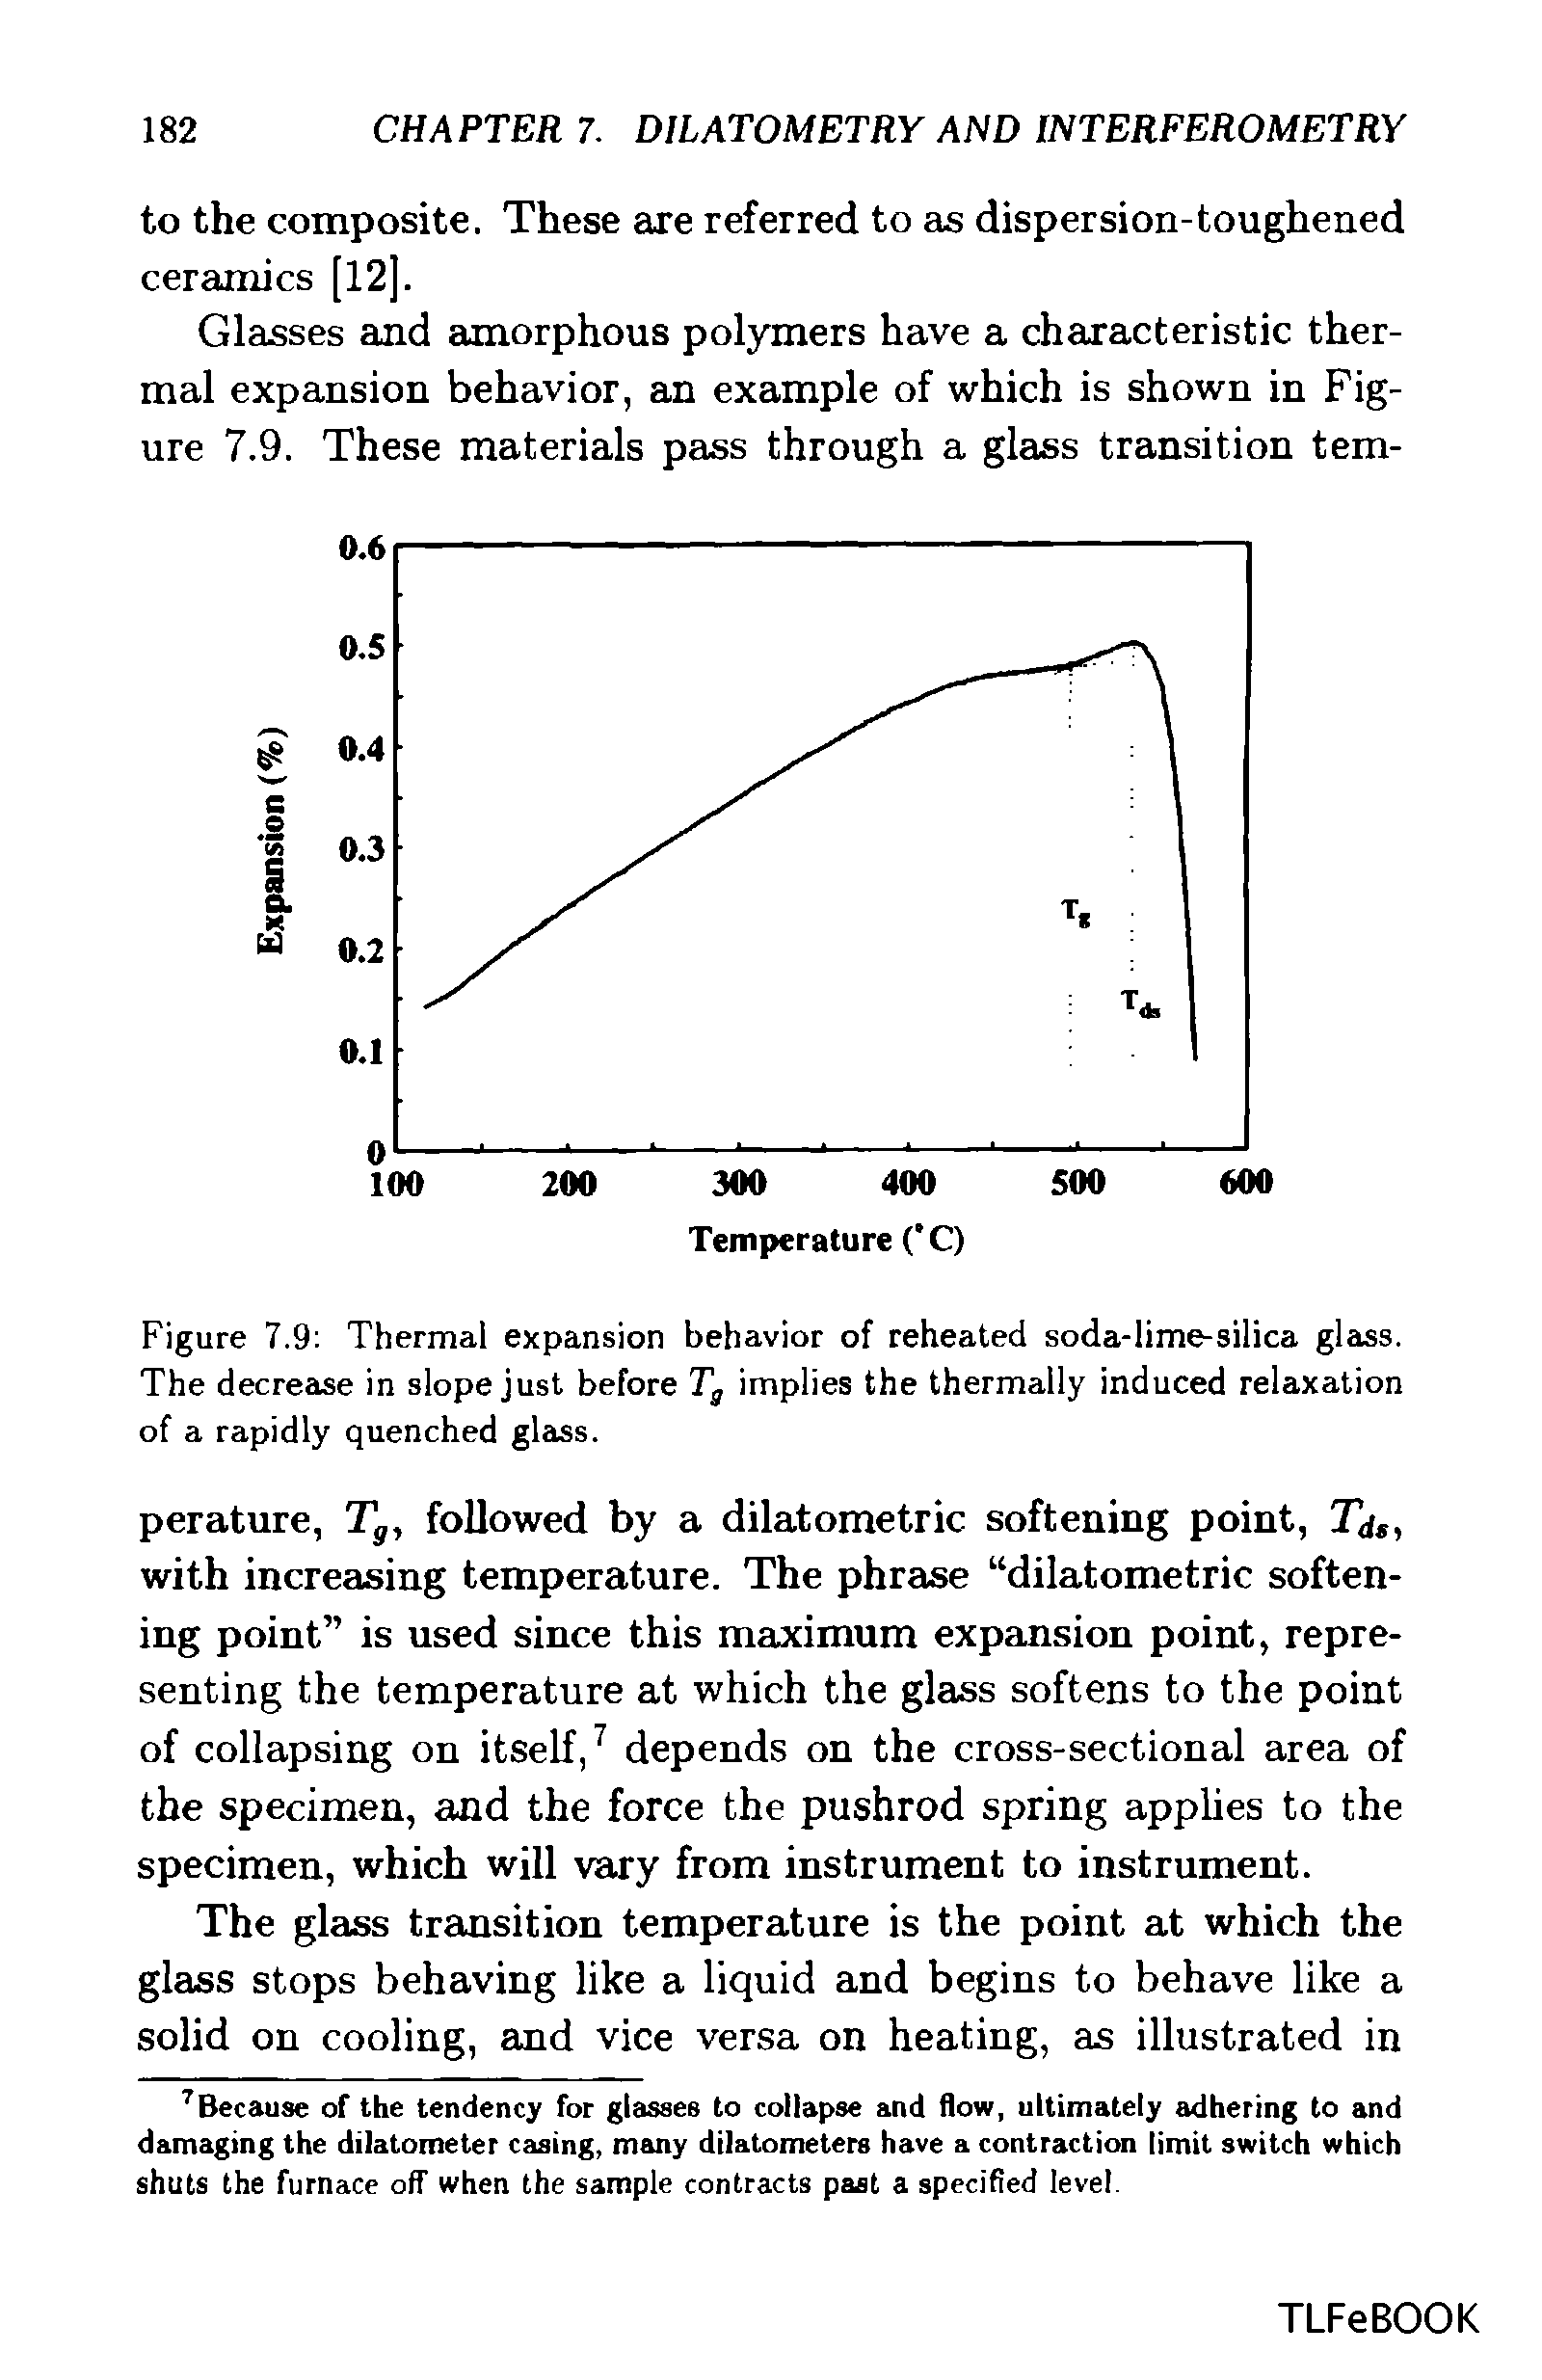 Figure 7.9 Thermal expansion behavior of reheated soda-lime-silica glass. The decrease in slope just before Tg implies the thermally induced relaxation of a rapidly quenched glass.